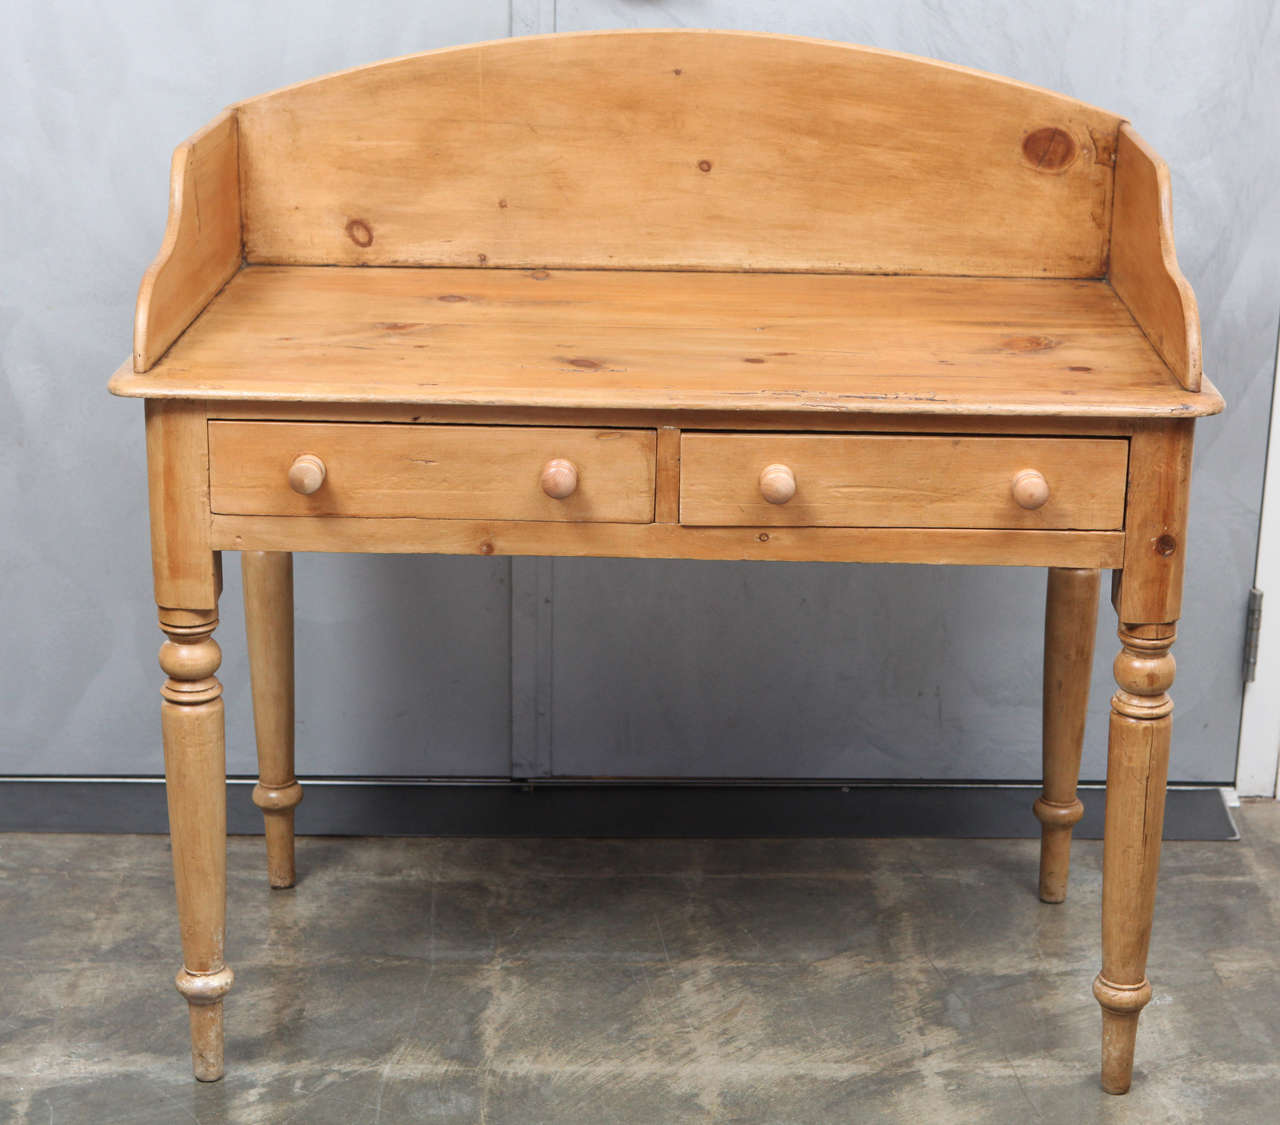 This English pine wash stand with side and back splash boards has a modern use as a desk or writing table. This piece displays remarkable construction which tells the story of a hardworking piece of furniture. The desk has some distressing in the